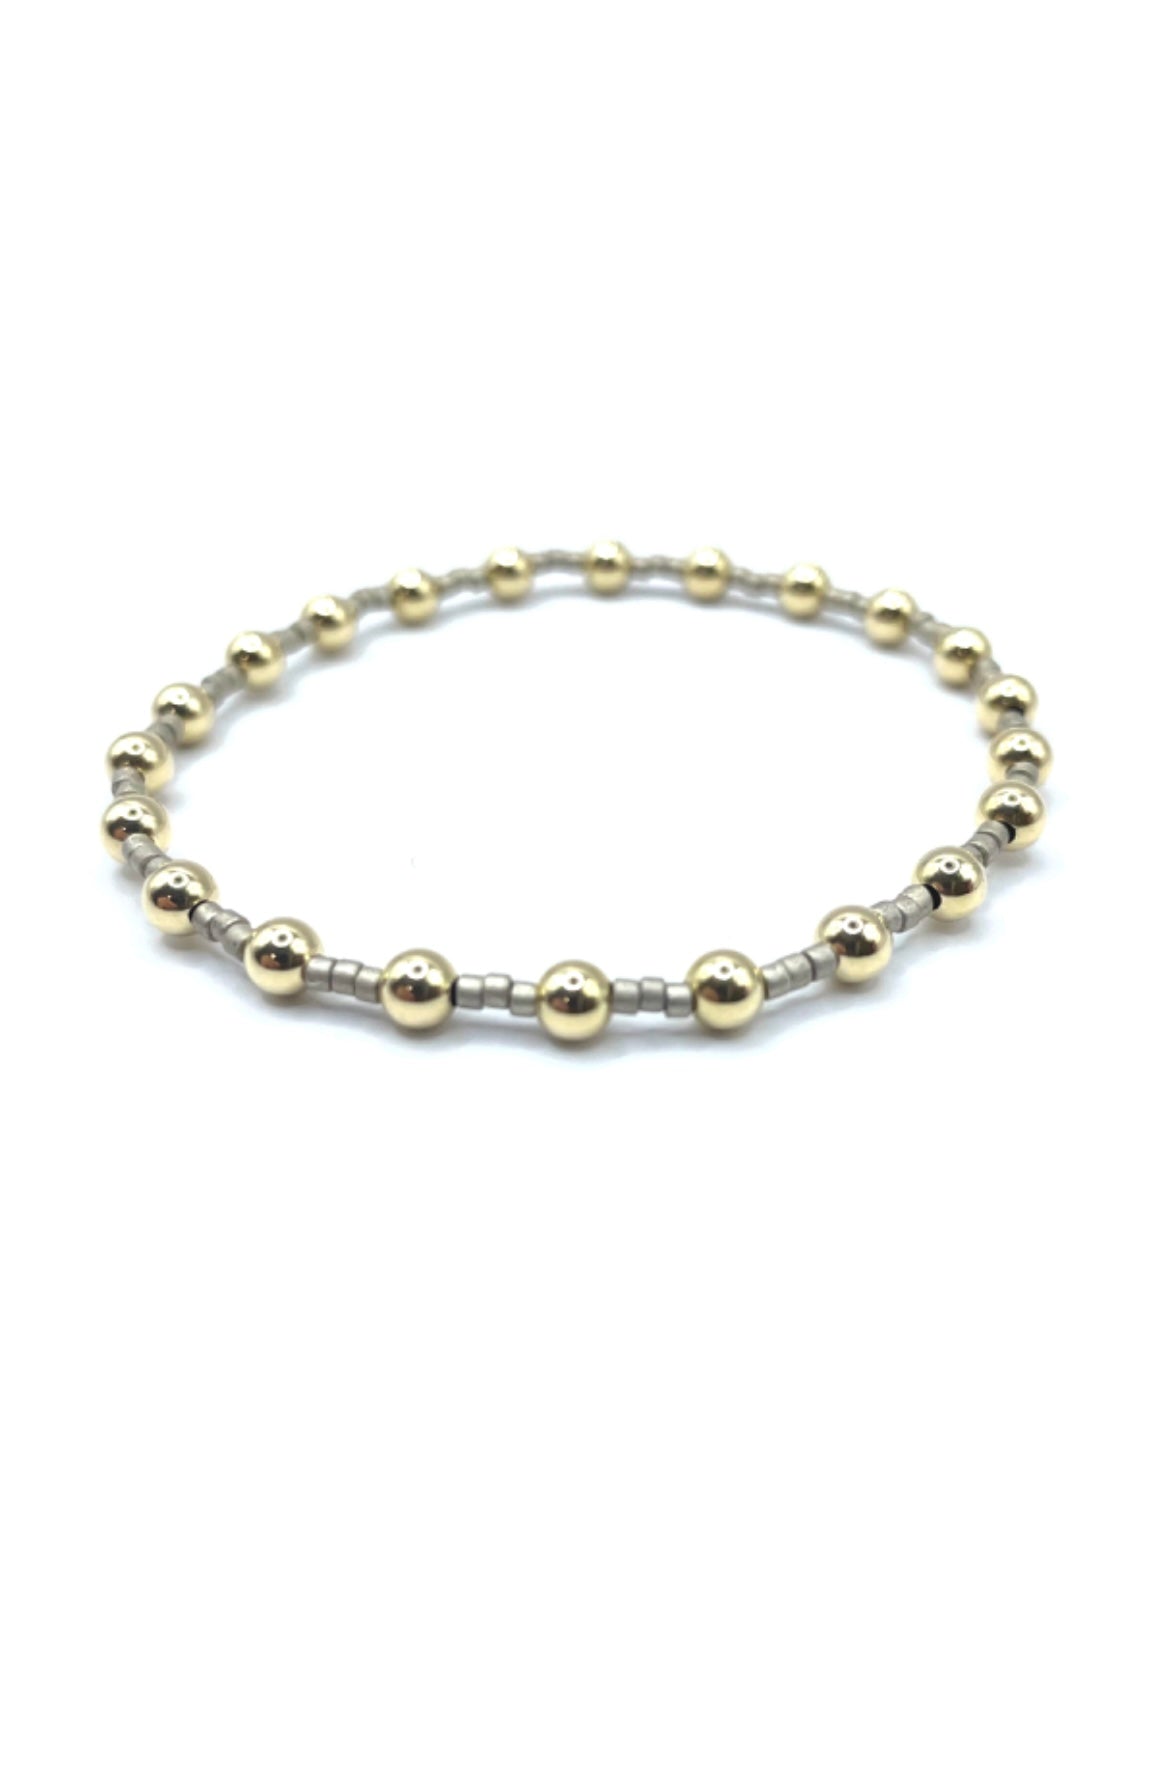 Newport Gold + 4mm Gold-410 Jewelry-Erin Gray-Simply Stylish Boutique | Women’s & Kid’s Fashion | Paducah, KY